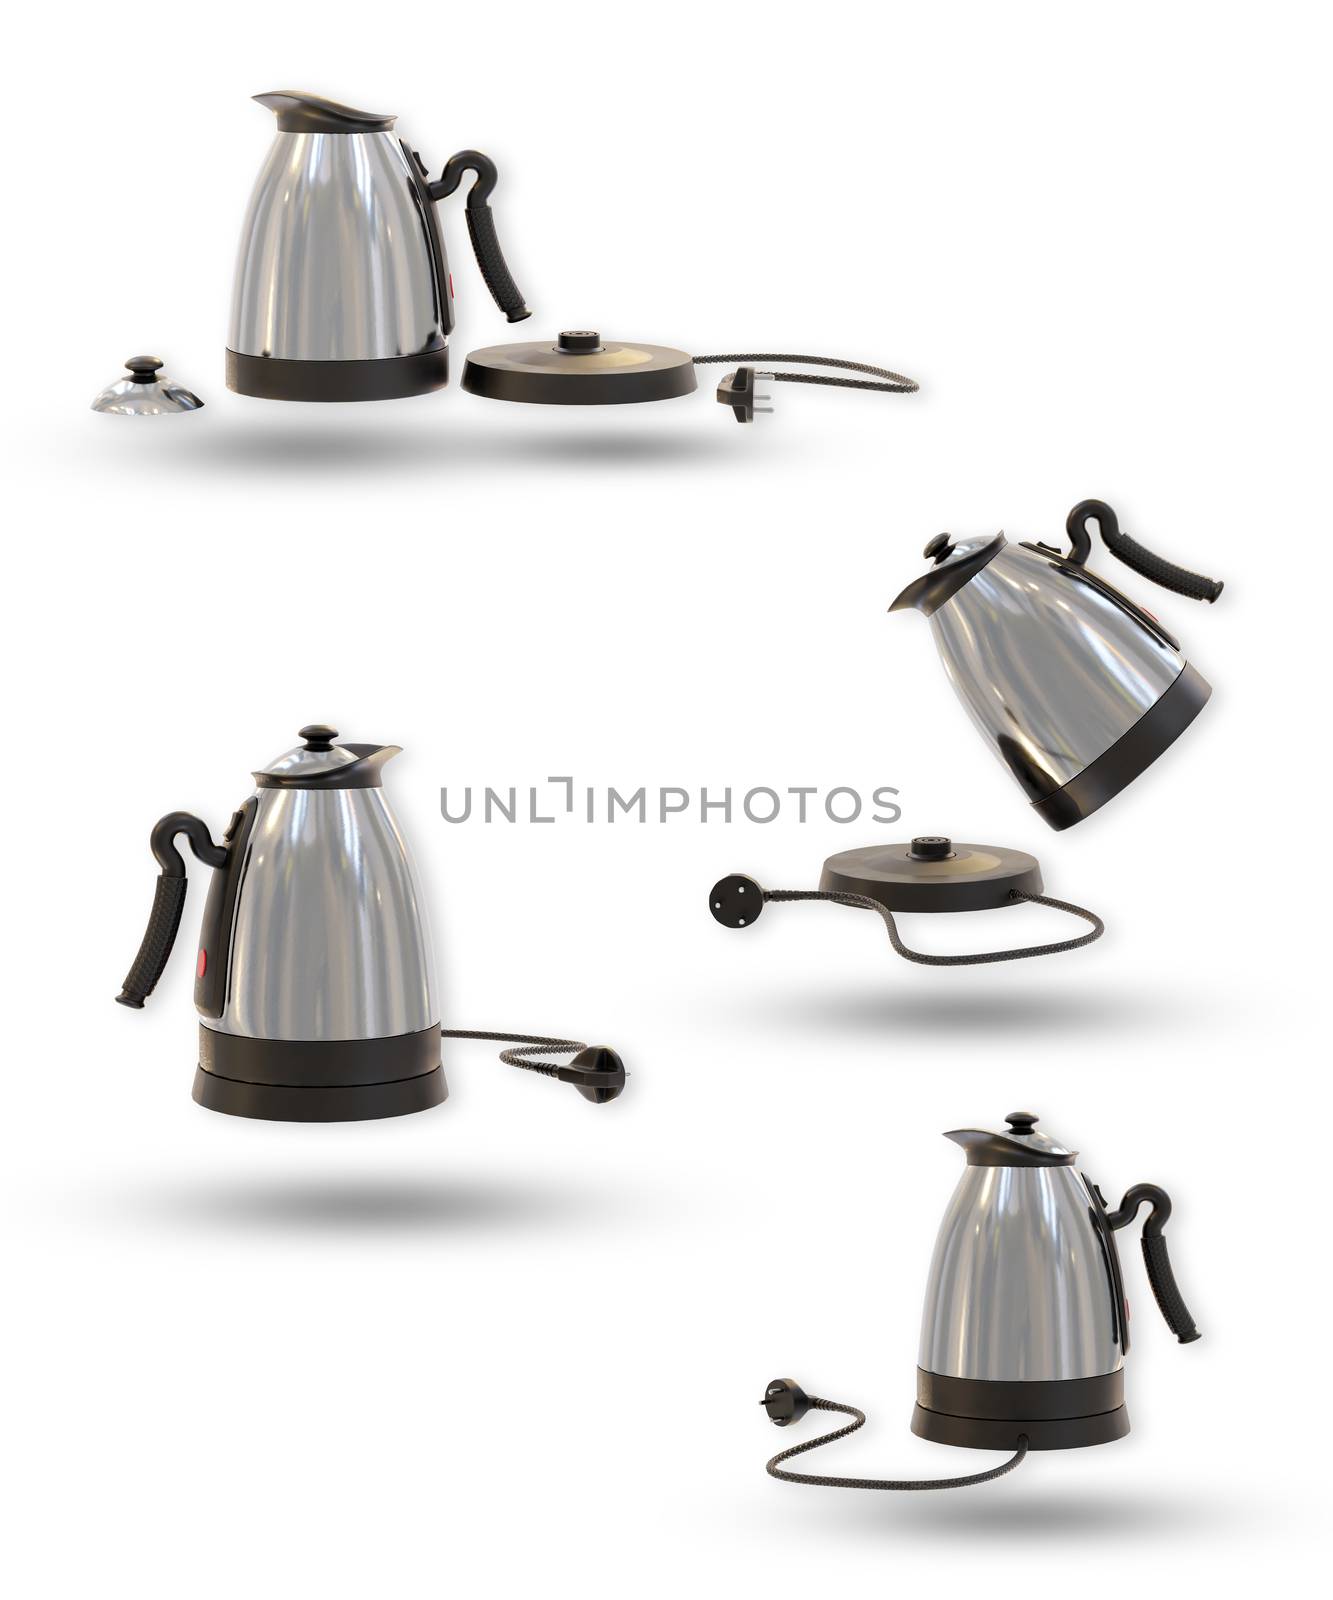 Electric kettle in modern shape. Can be used to boil water more conveniently and easier to brew coffee or tea. Isolate and clipping path on a white background. Concept of kitchenware. 3D rendering.